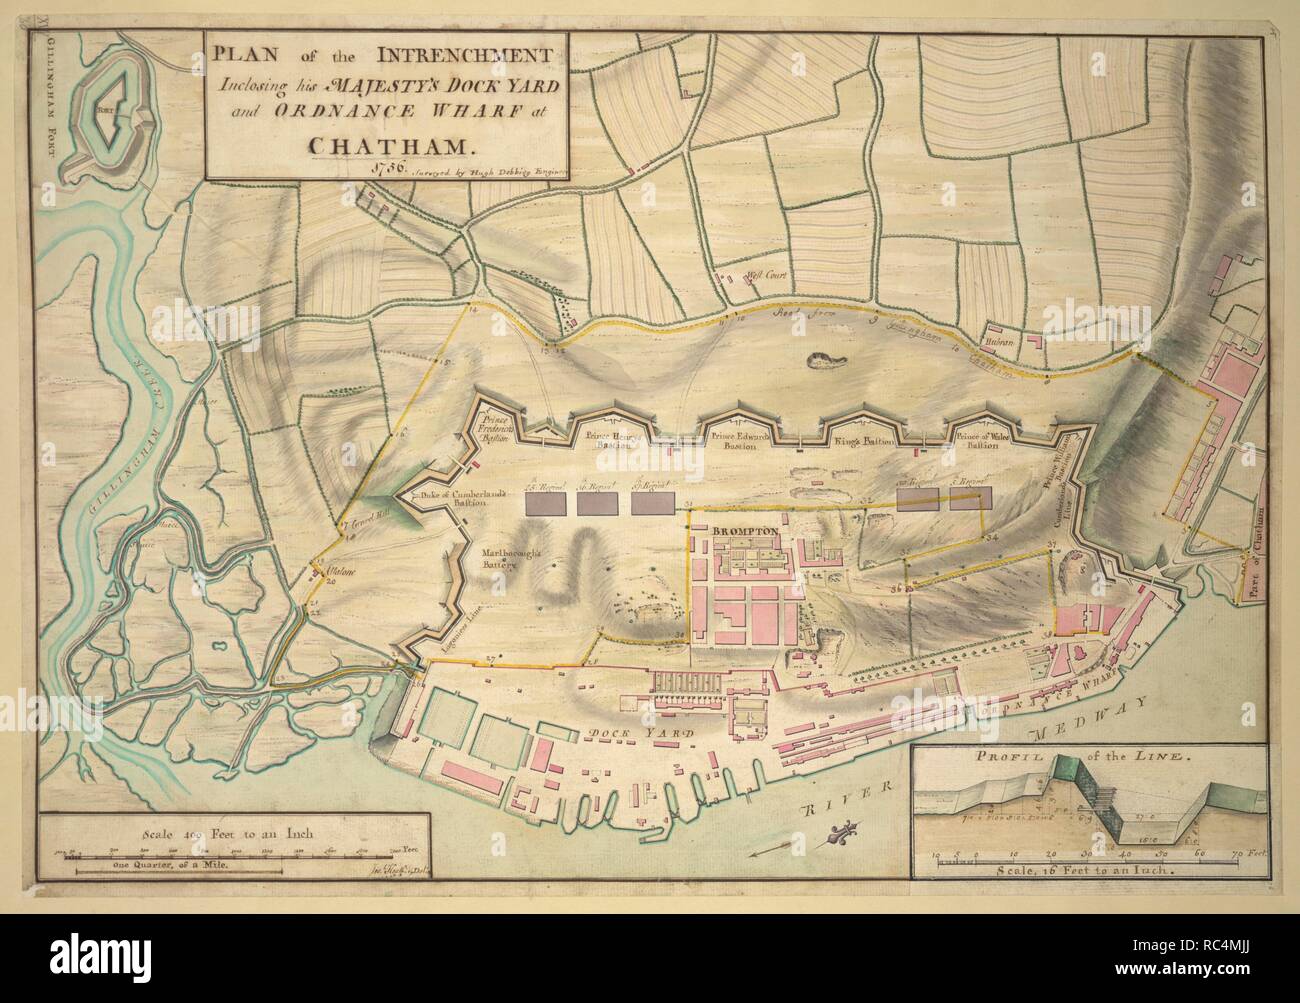 Chatham. A colored plan of the intrenchment inclosing his M. 1756. Plan of the dock-yard and wharf at Chatham.  Image taken from A colored plan of the intrenchment inclosing his Majesty's Dock-yard and Ordnance Wharf at Chatham, surveyed by Hugh Debbieg, Engineer, 1756; drawn by Joseph Heath, on a scale of 400 feet to an inch. Ms. 1 f. 8 in. x 1 f. 2 in. 51 x 36 cm..  Originally published/produced in 1756. . Source: Maps.K.Top.16.40,. Language: English. Stock Photo